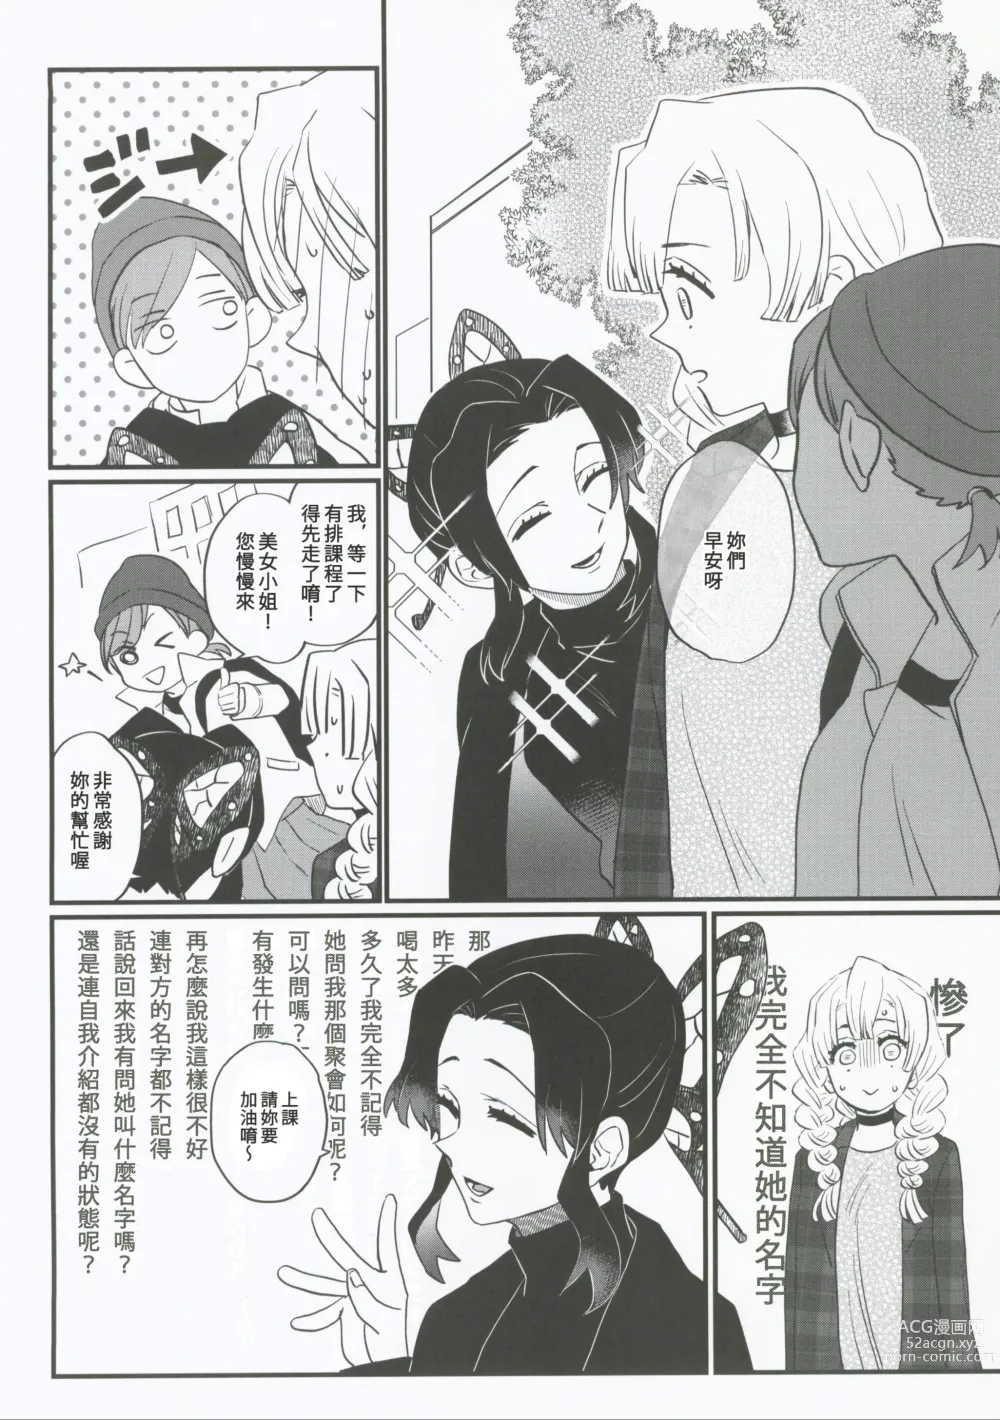 Page 14 of doujinshi 屬於妳的Omega